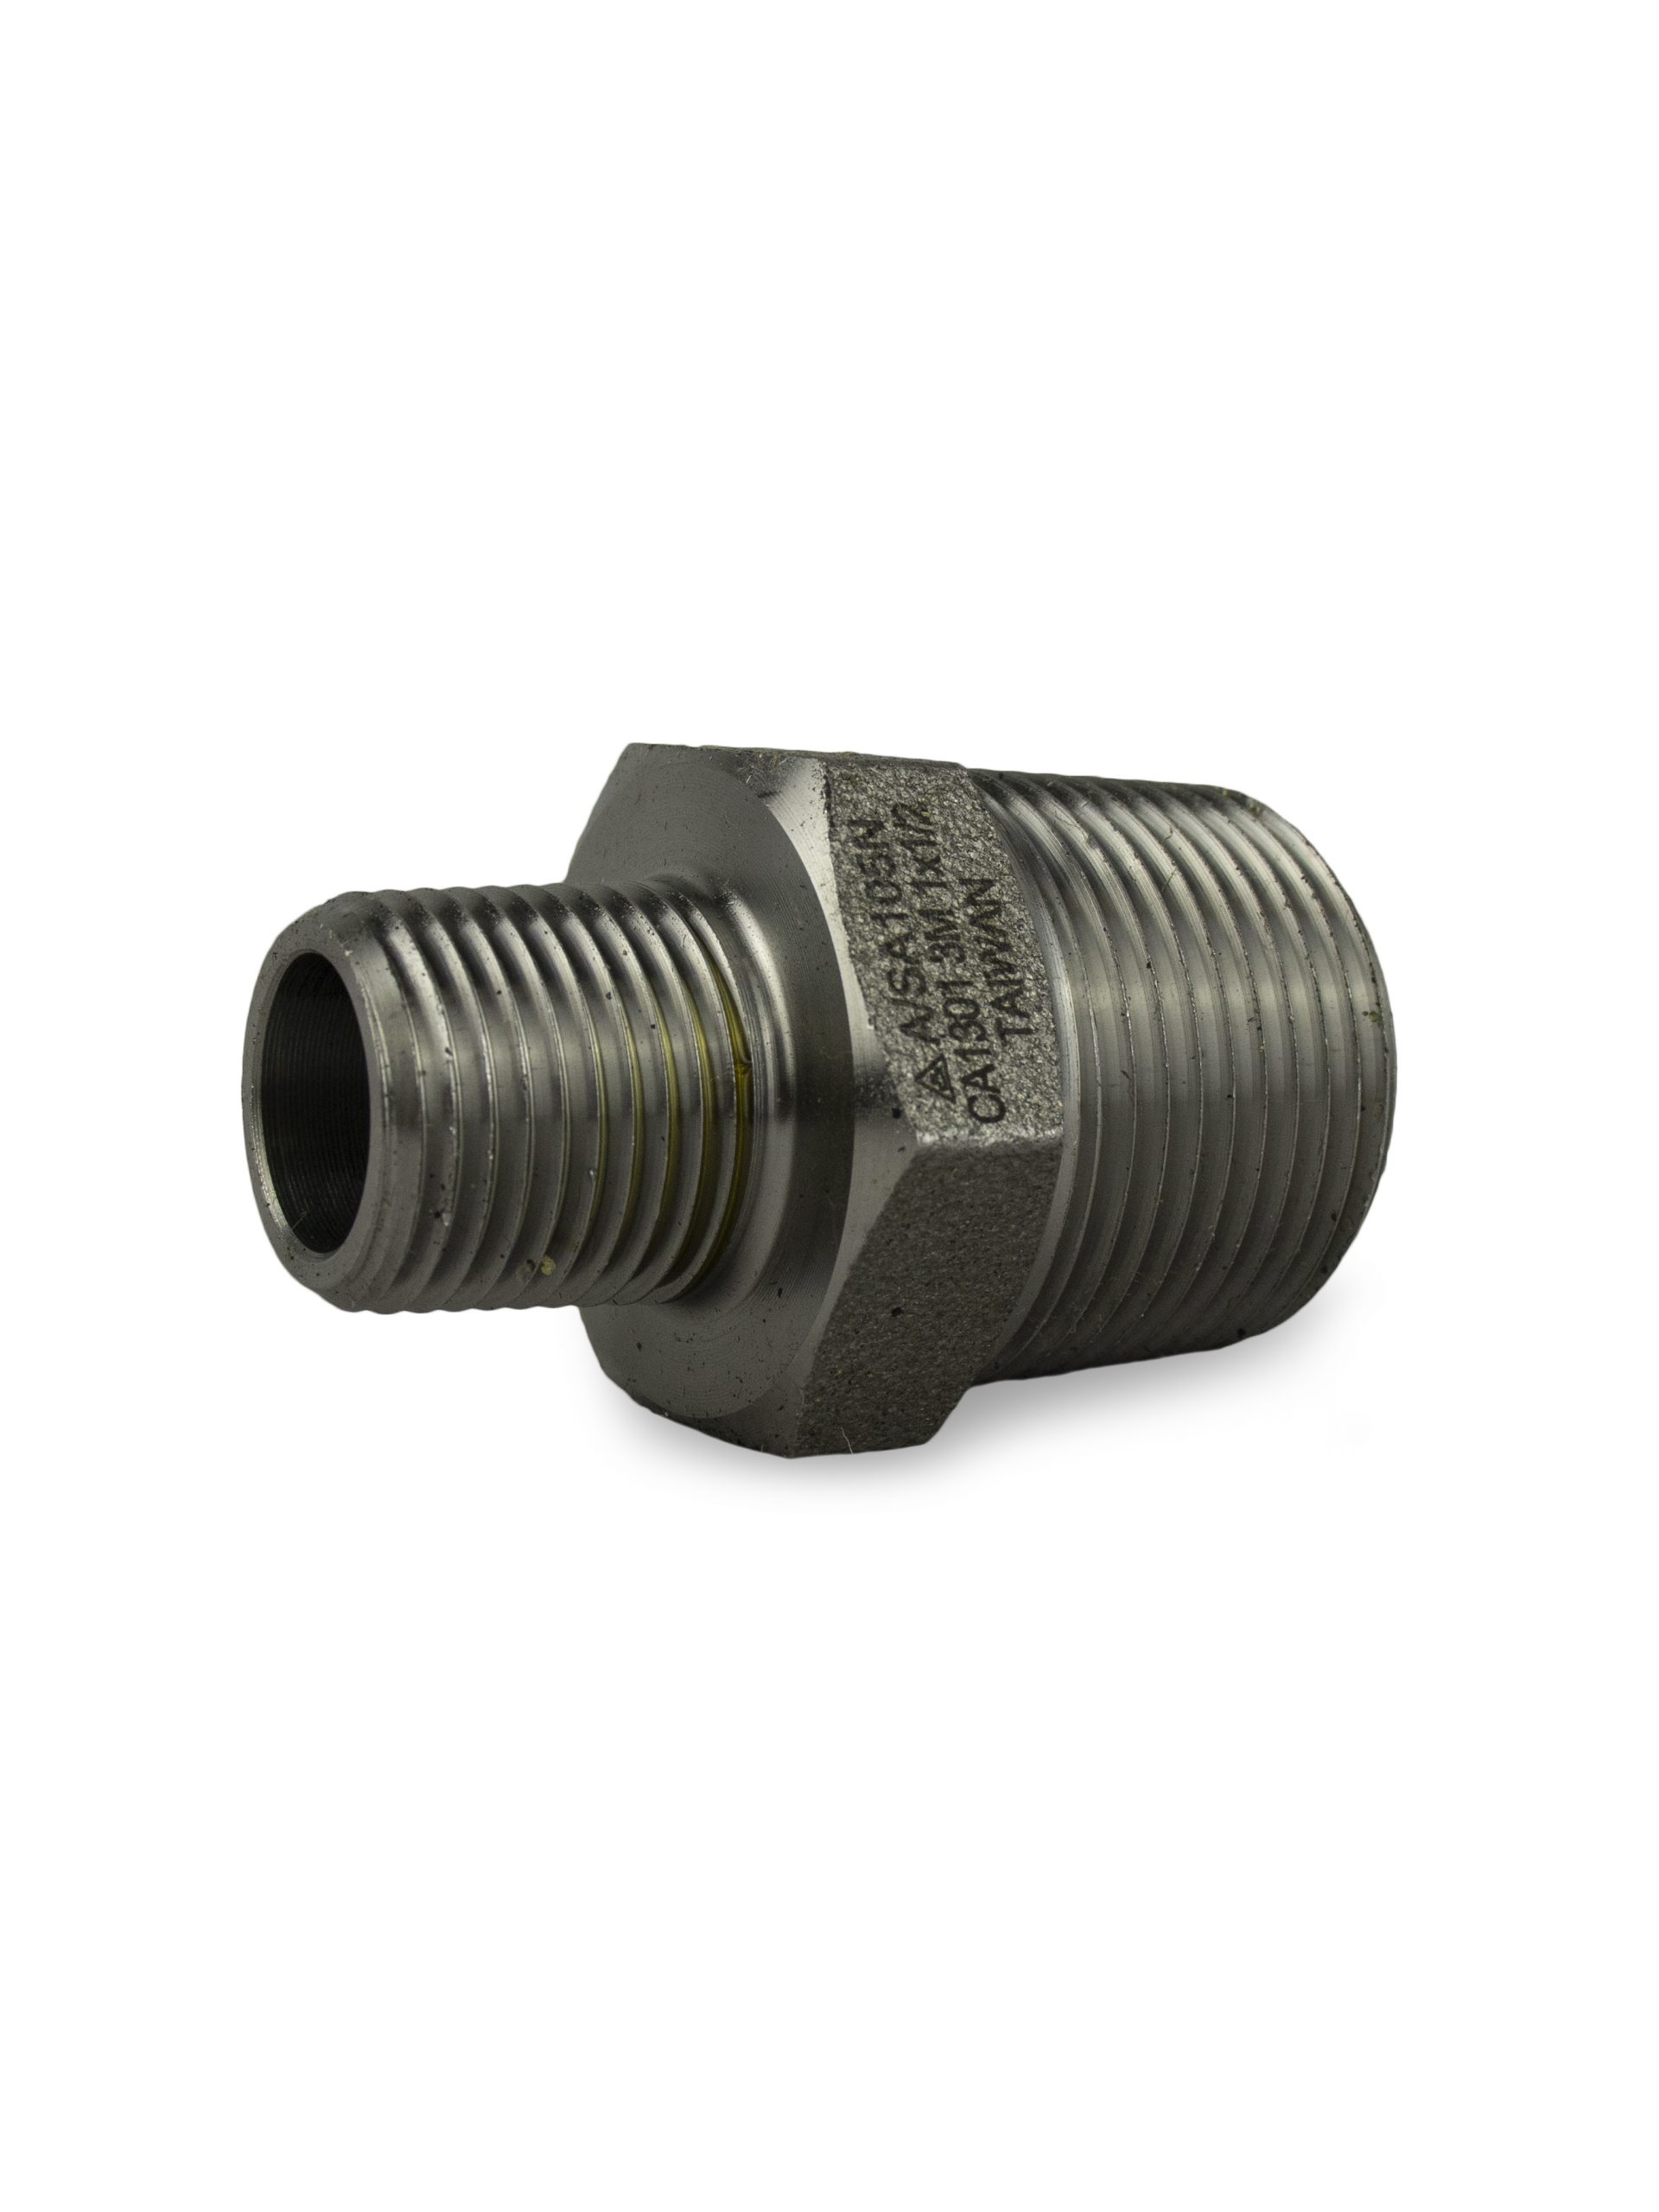 FORGED STEEL REDUCER HEX NIPPLE 1 Inches X 1/2 Inches CLASS 3000 NPT from Gas Equipment Company Llc Abu Dhabi, UNITED ARAB EMIRATES